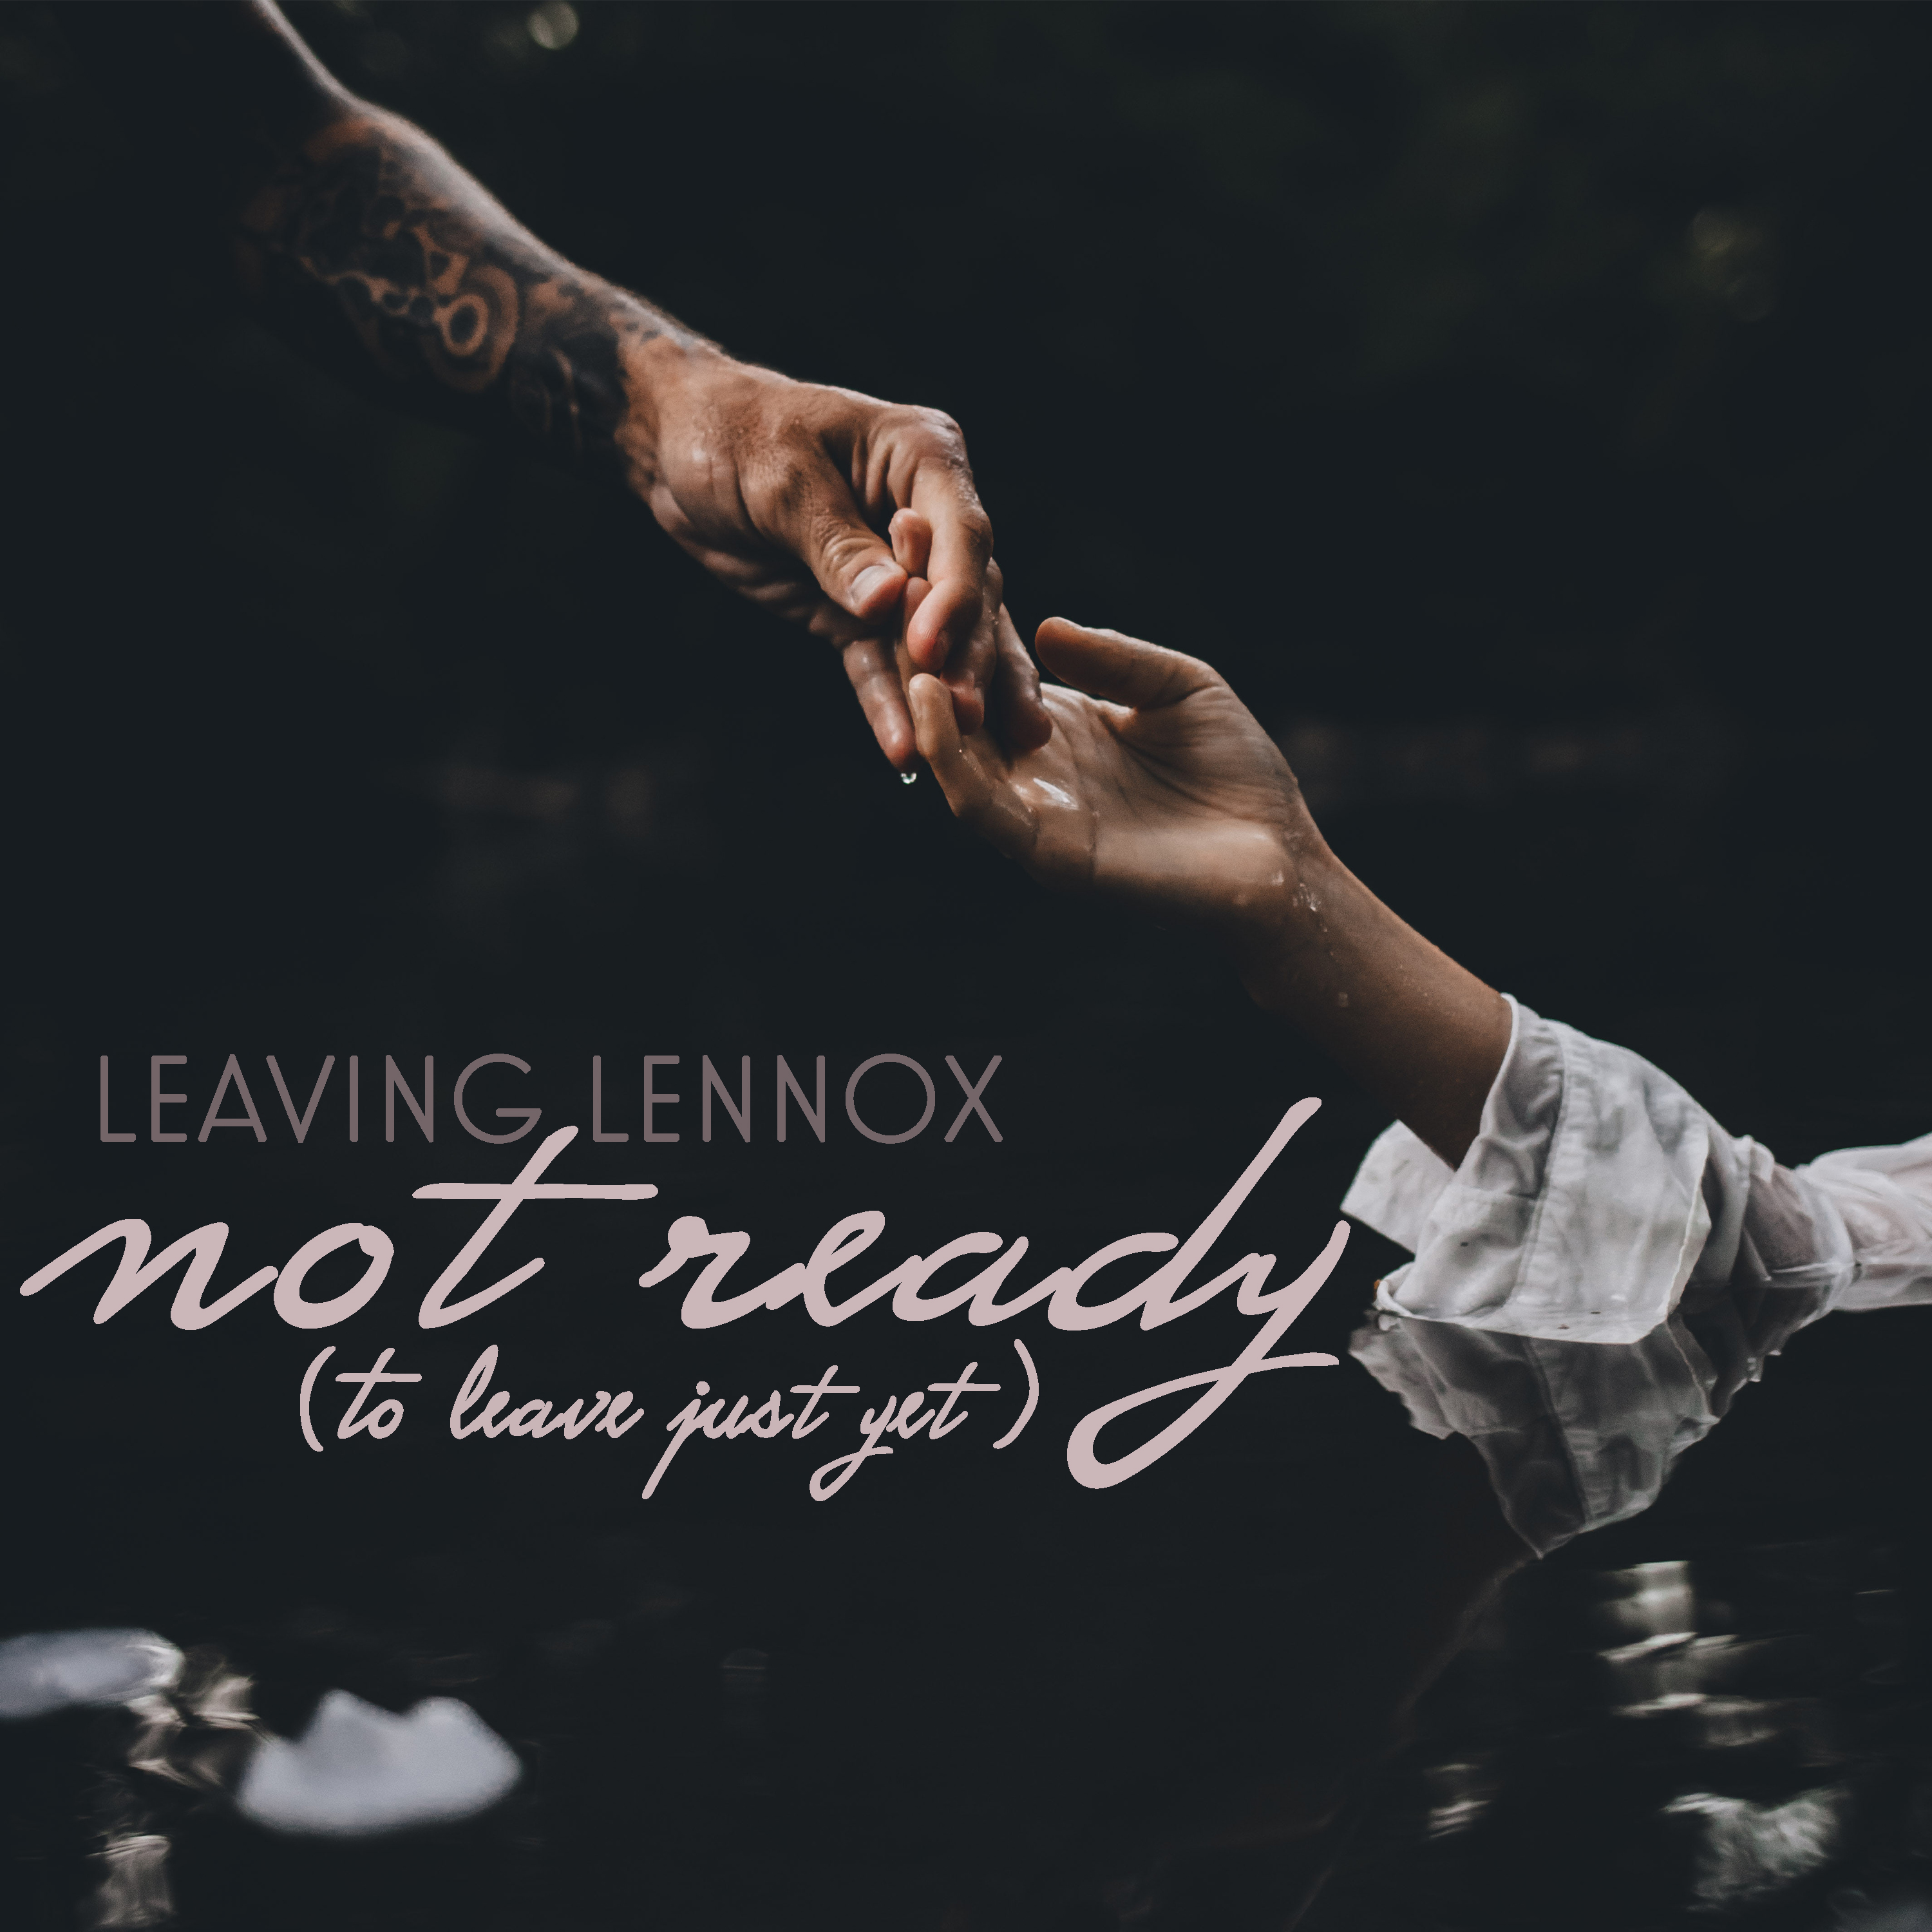 'Leaving Lennox’ release their new single on August 7th